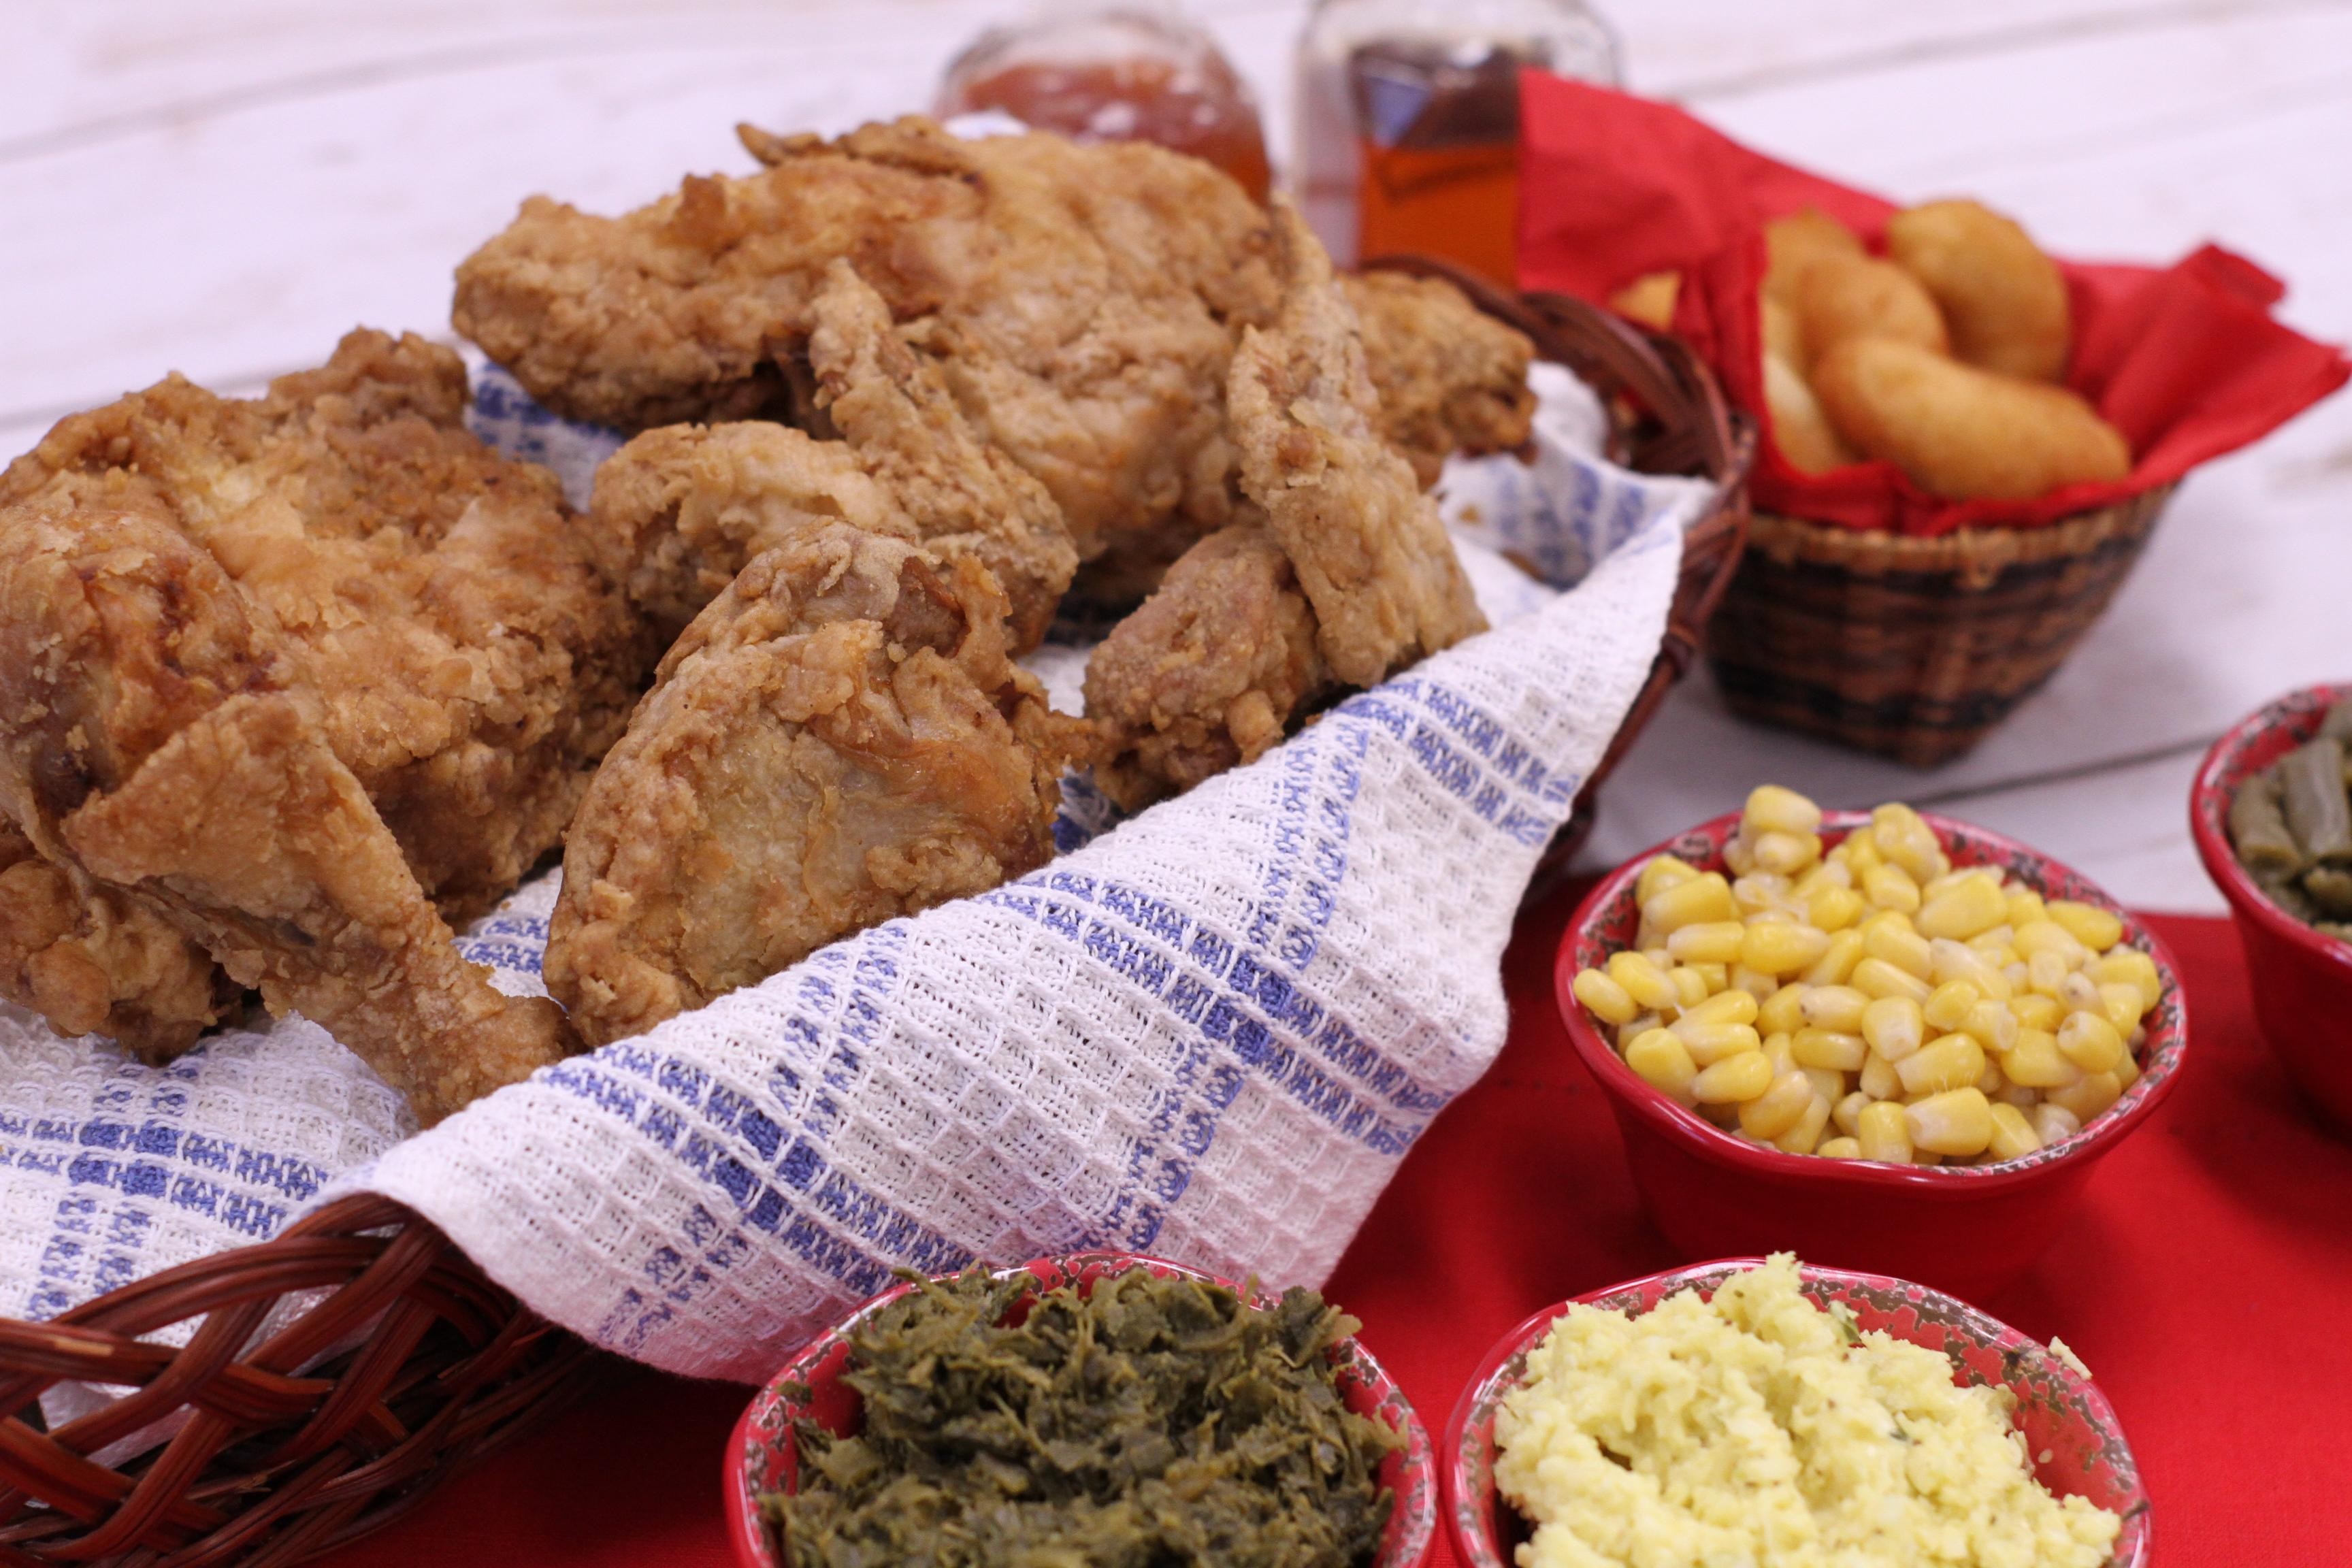 Value Pack 3 15-20 People, 4 Pts Eastern NC BBQ, 32 pieces of Chicken, 1/2 gallon Slaw, 1/2 gallon Potatoes, 1/2 gallon Green Beans, 60 Hushpuppies, 3 gallons Iced Tea